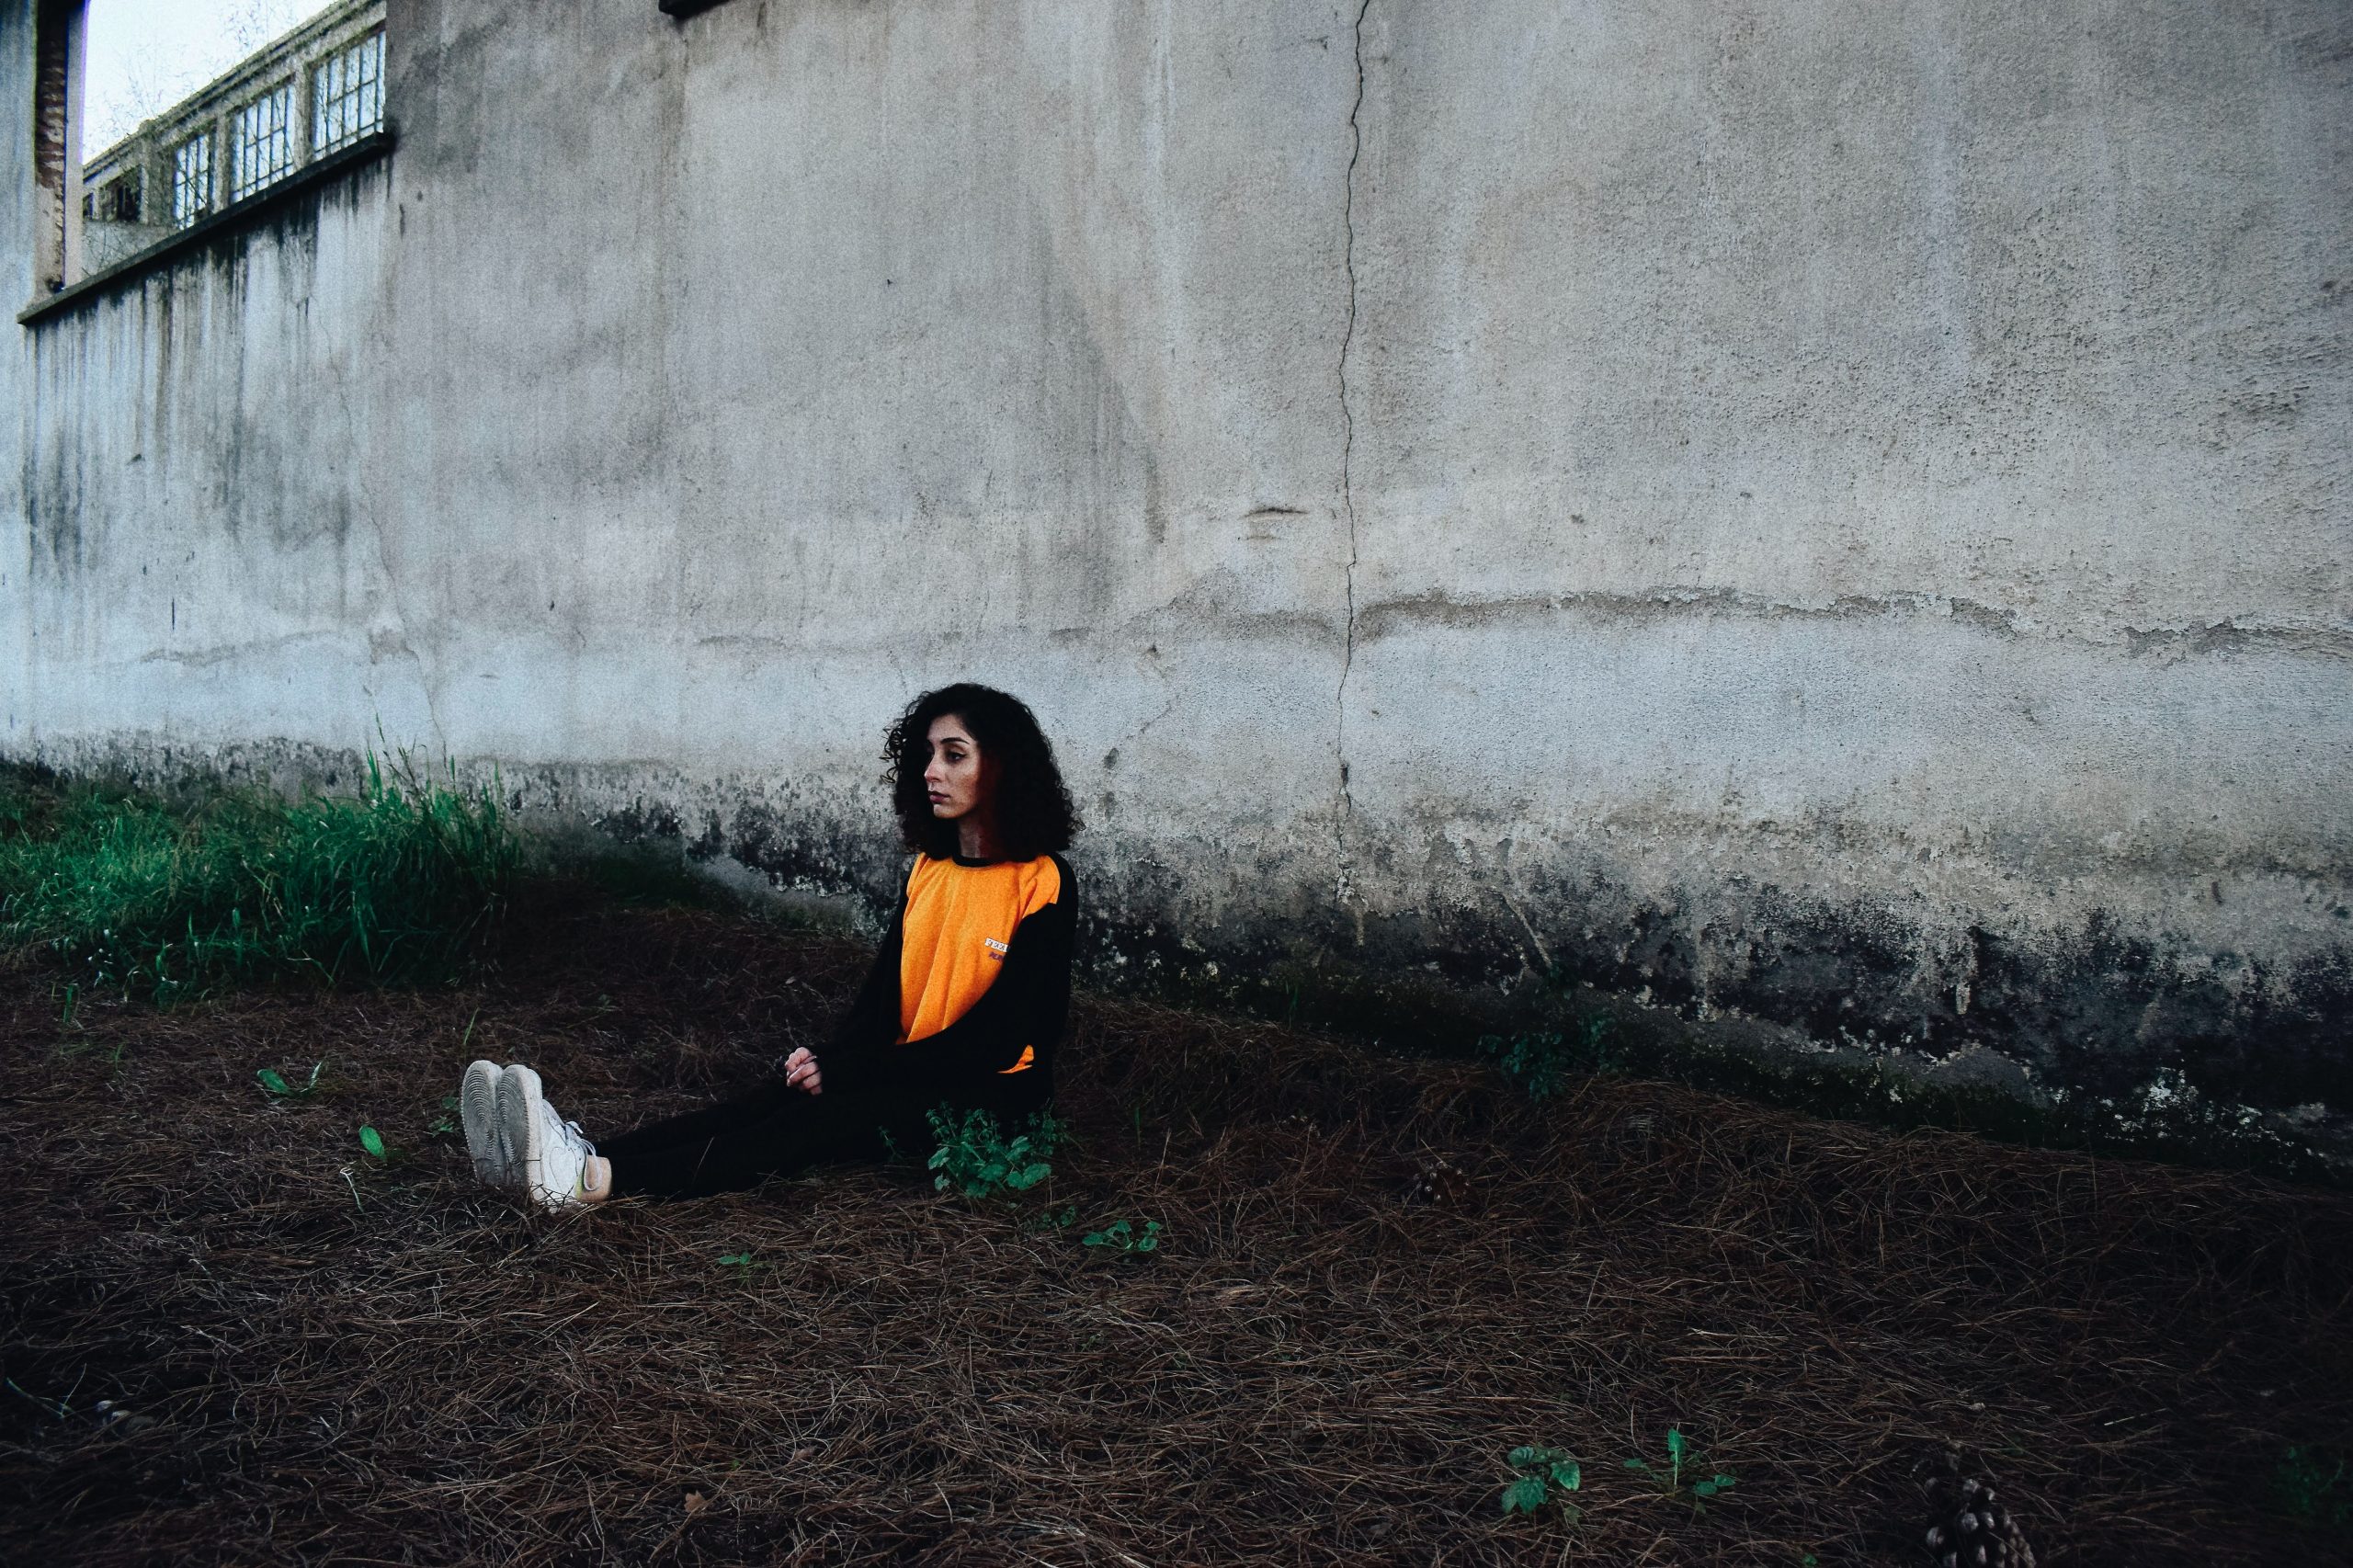 A young mixed race girls sits in th dirt under a concrete wall. She looks sad and wears an organge t-shirt and dark trousers